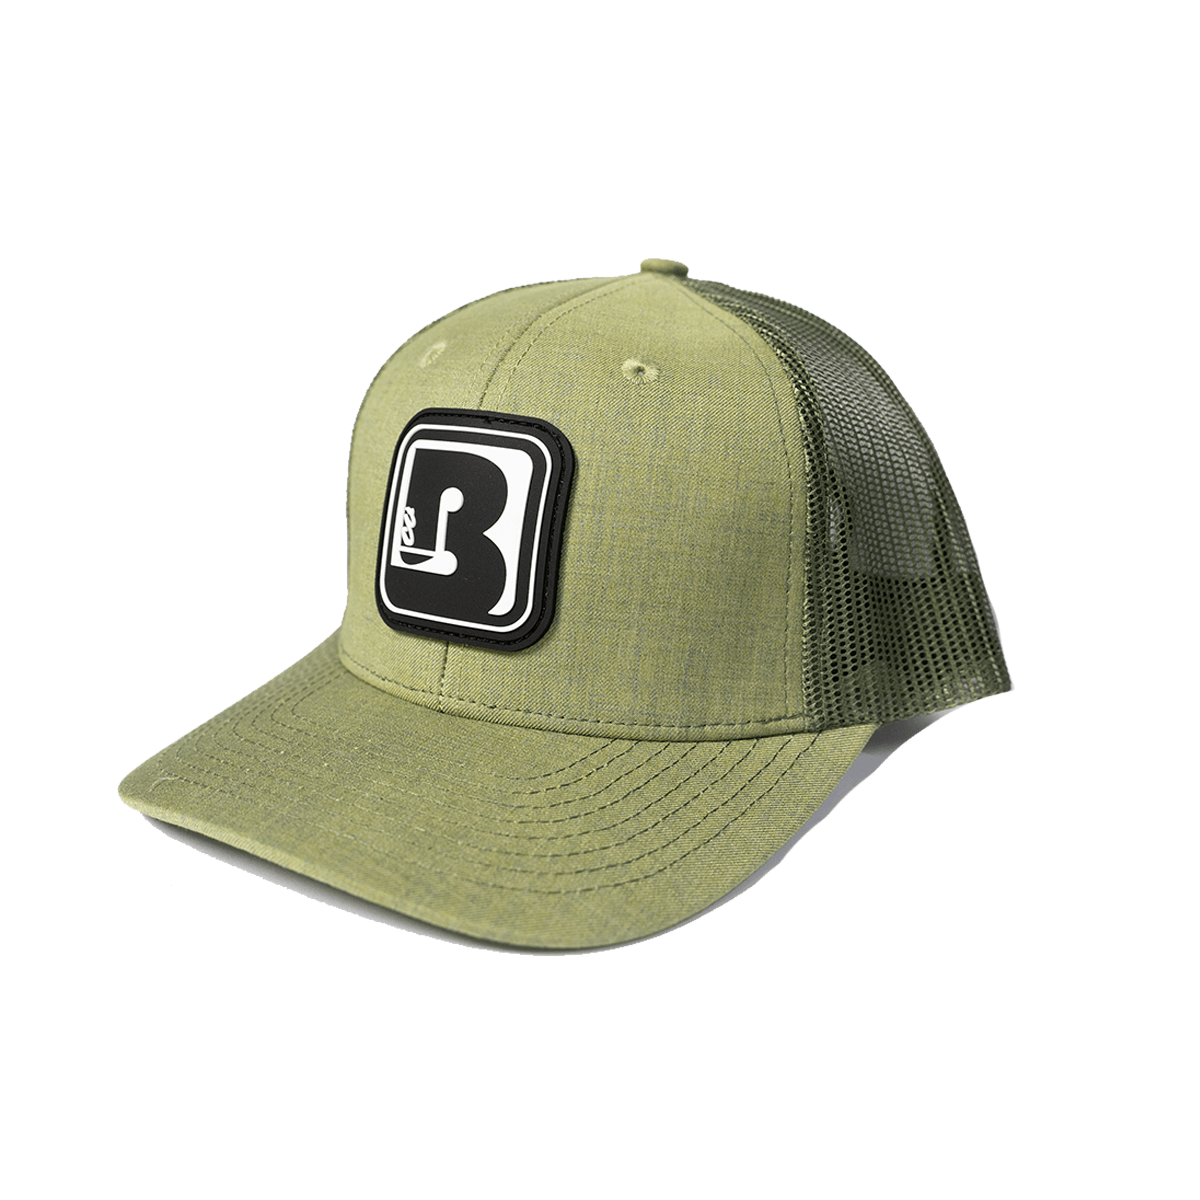 BoardCo Warrior Hat Olive with B Patch - BoardCo